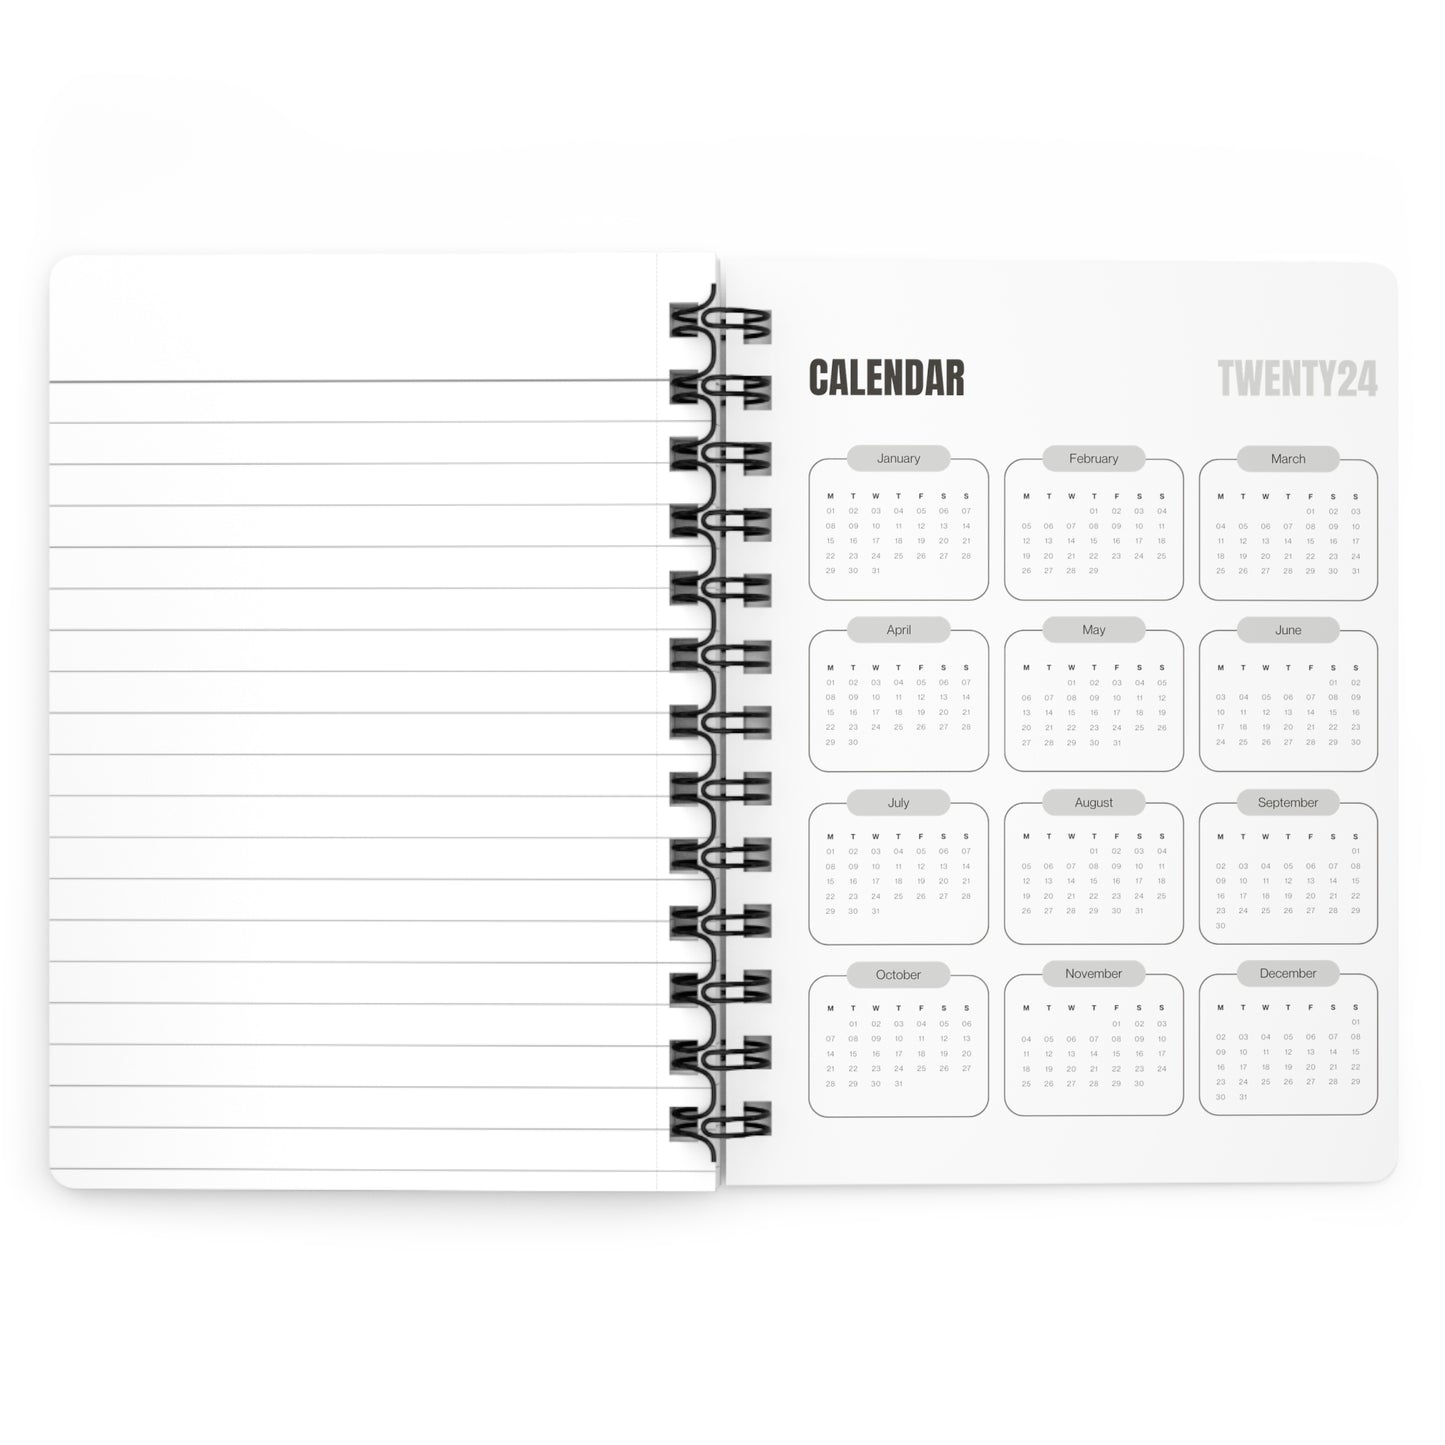 Genie - Spiral Bound Notebooks and Journals with 2023-2024 Year-at-a-Glance Calendar